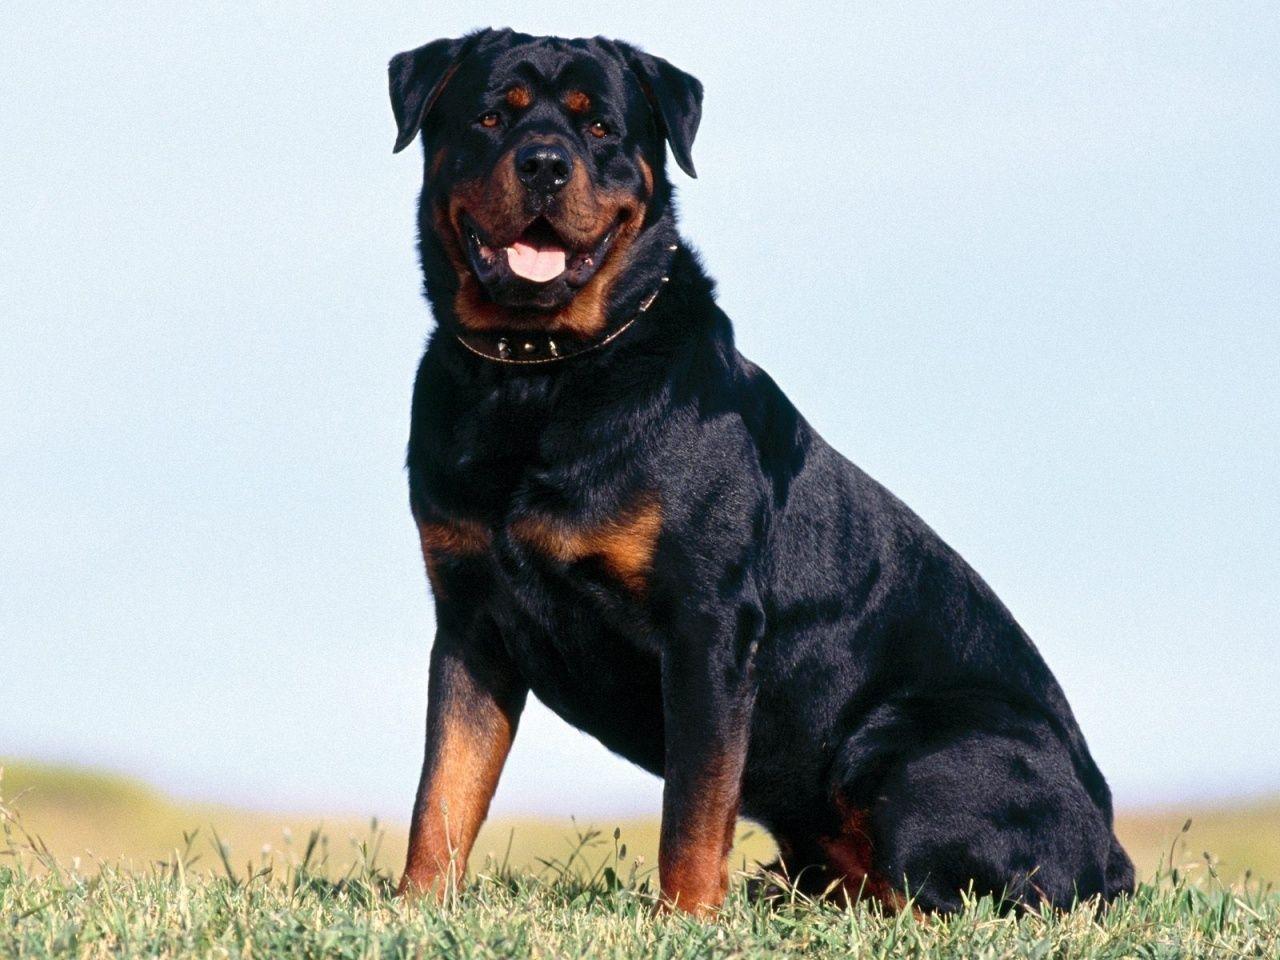 Lovely Rottweiler dog photo and wallpaper. Beautiful Lovely